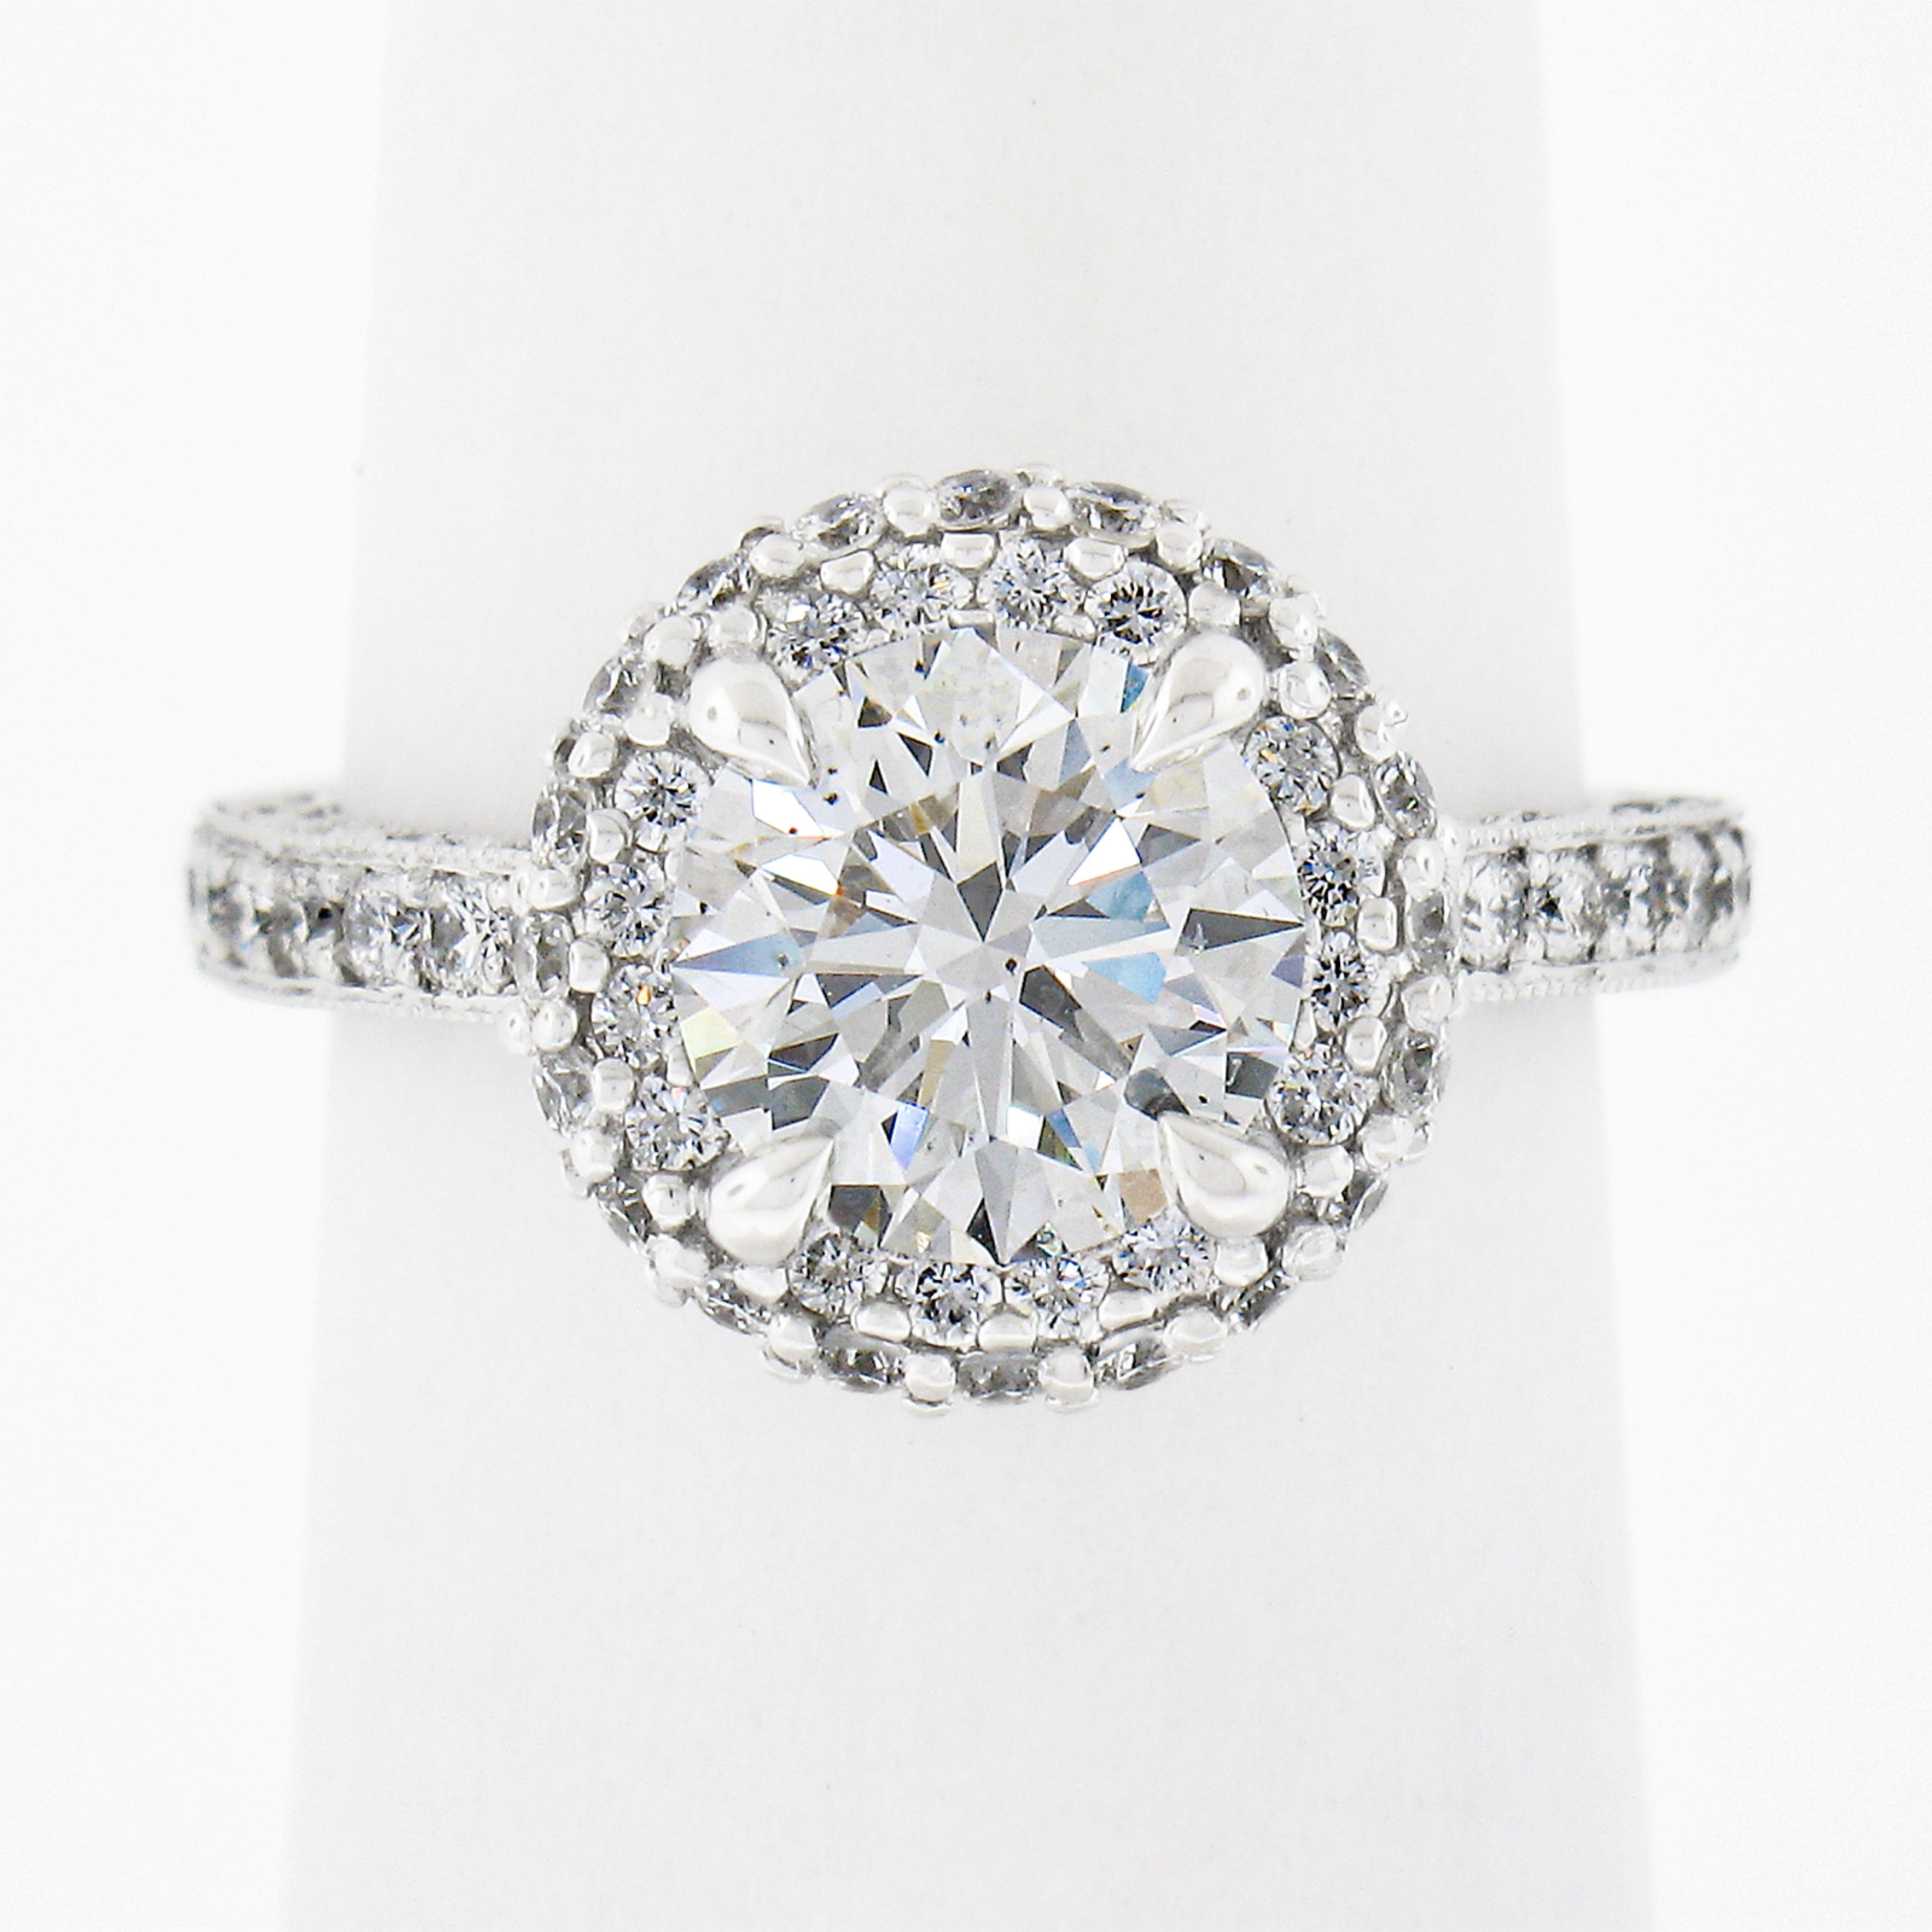 This classic and fiery engagement ring is designed by Tacori and crafted in solid 18k white gold. It features a truly breathtaking, GIA certified, round brilliant cut solitaire claw-prong set at the center of an elegantly designed halo. This center